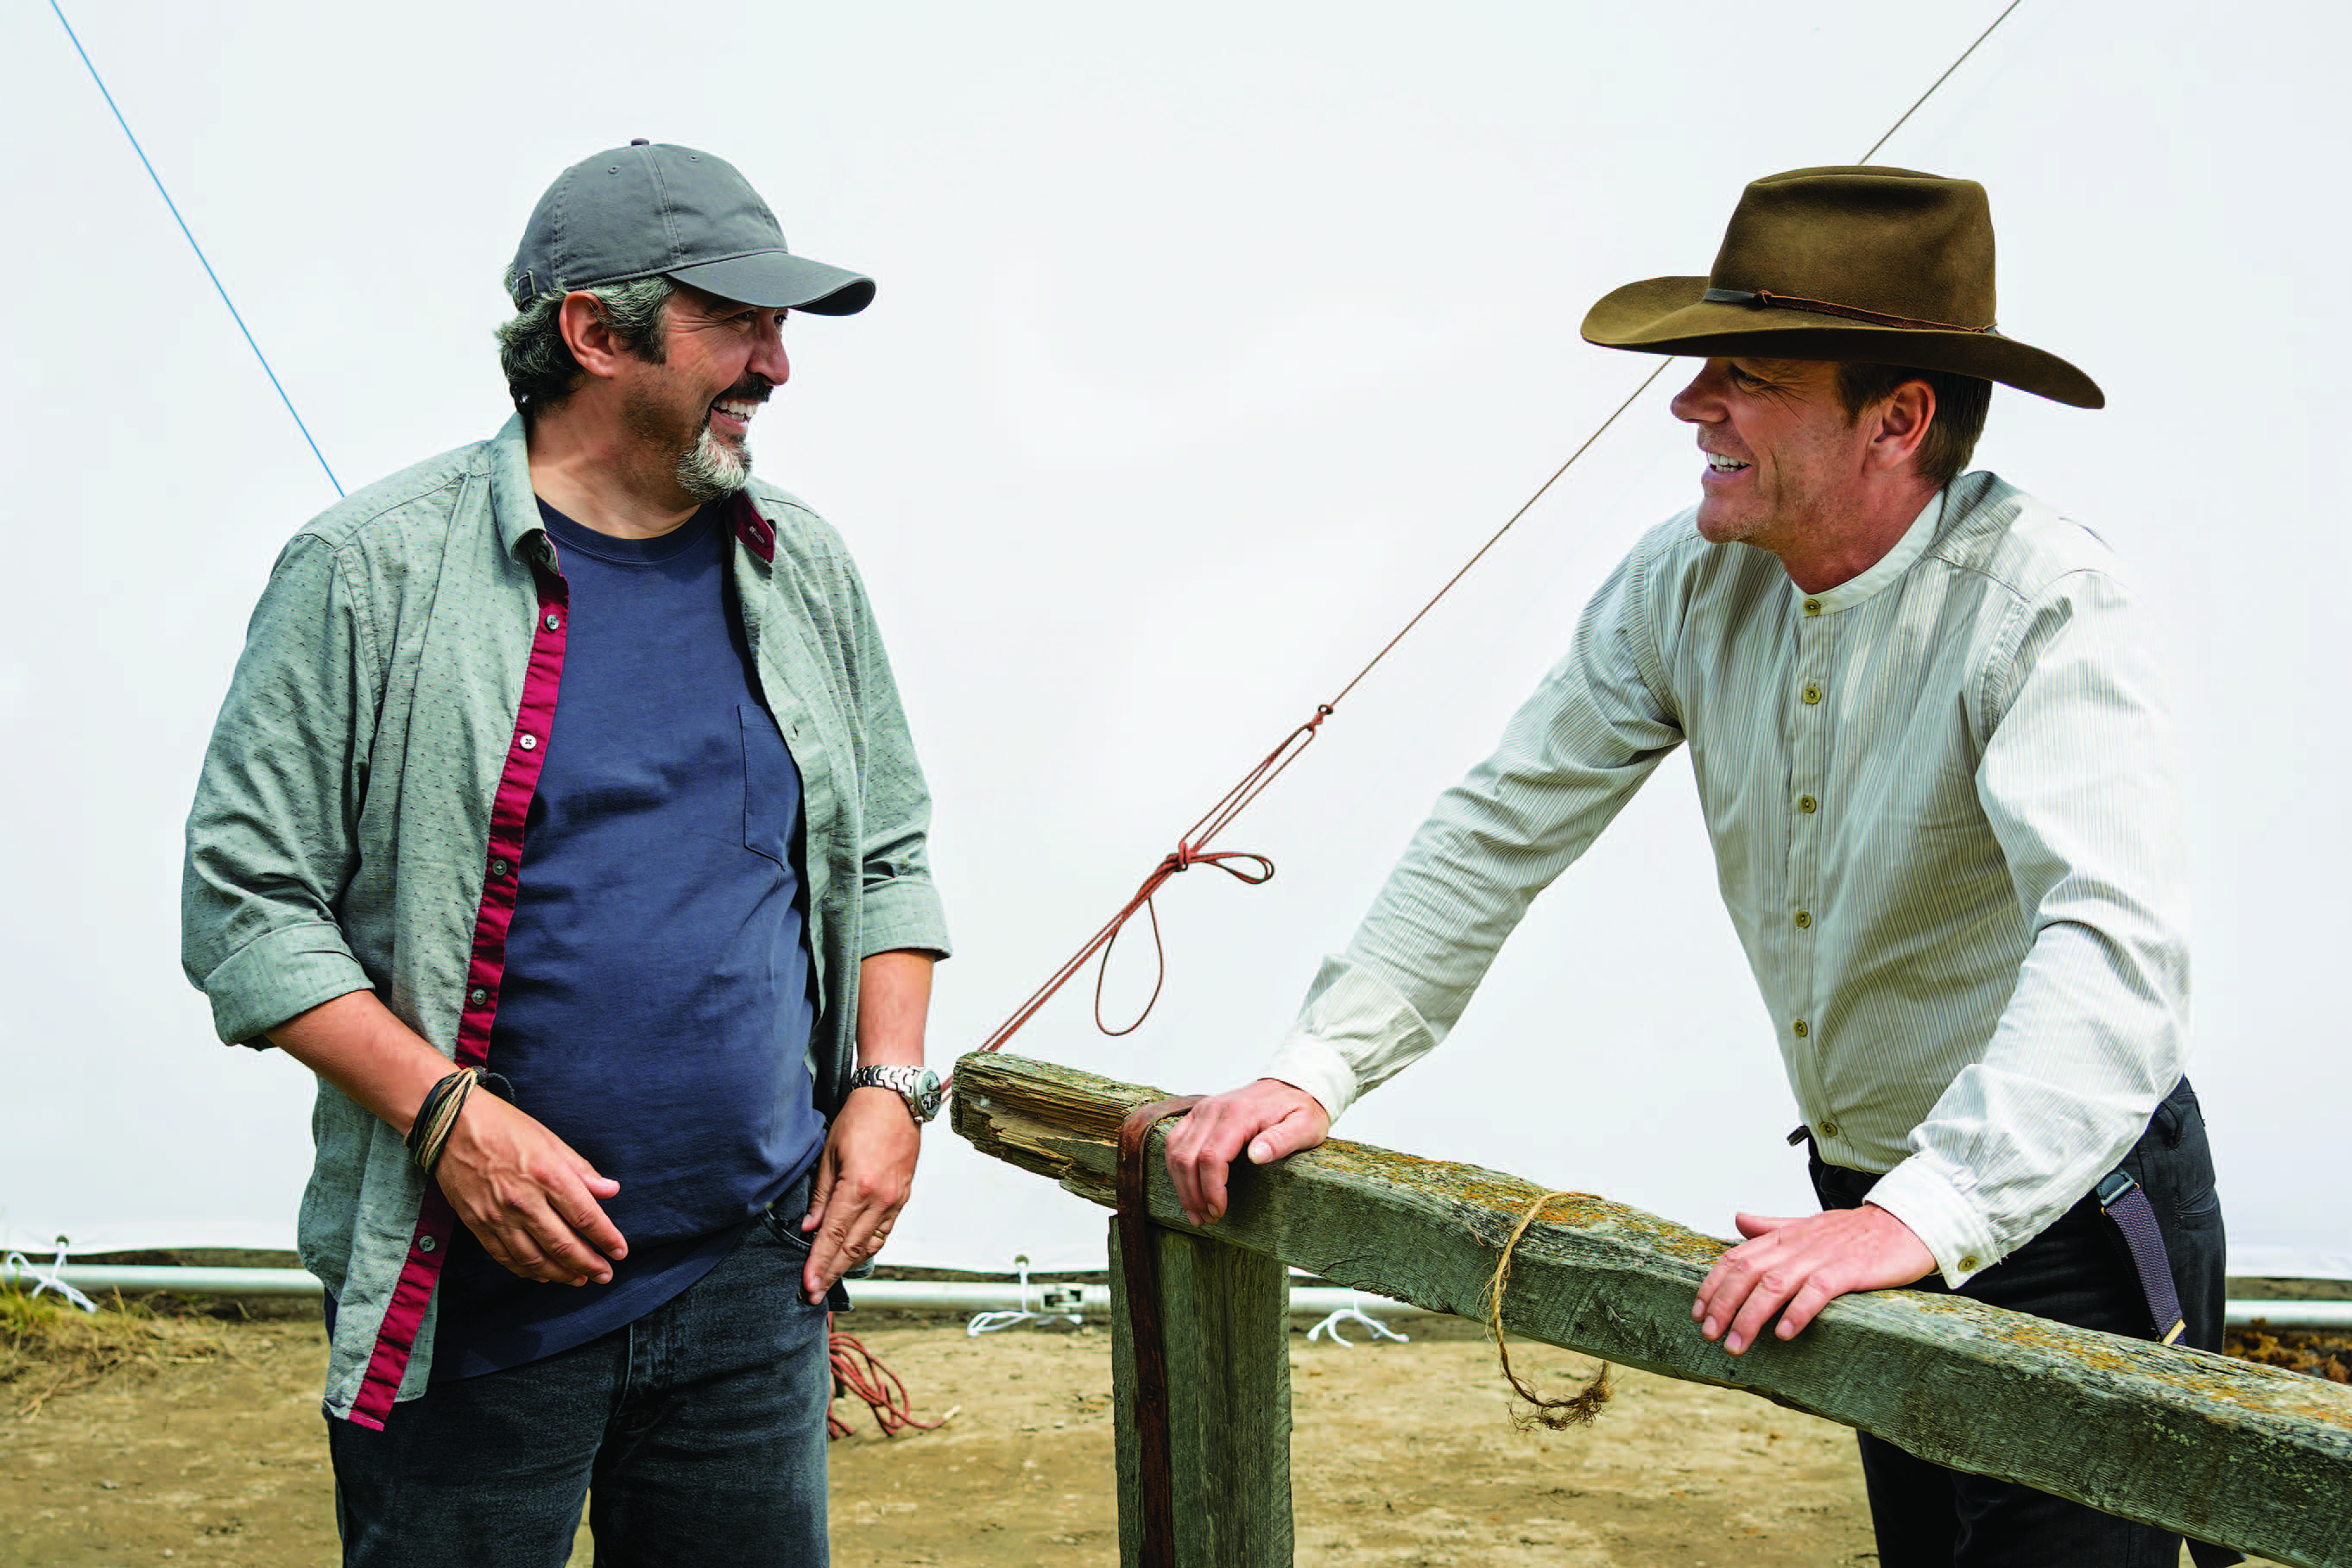 Kiefer didn’t have to look far to find a director for his film venture. He quickly convinced Jon Cassar (left), who didn’t have any prior film experience but had worked with Kiefer over 13 years on the set of 24. “Every actor and director wants to do a western,” Cassar has said. Photography: Courtesy Momentum Pictures © 2016 